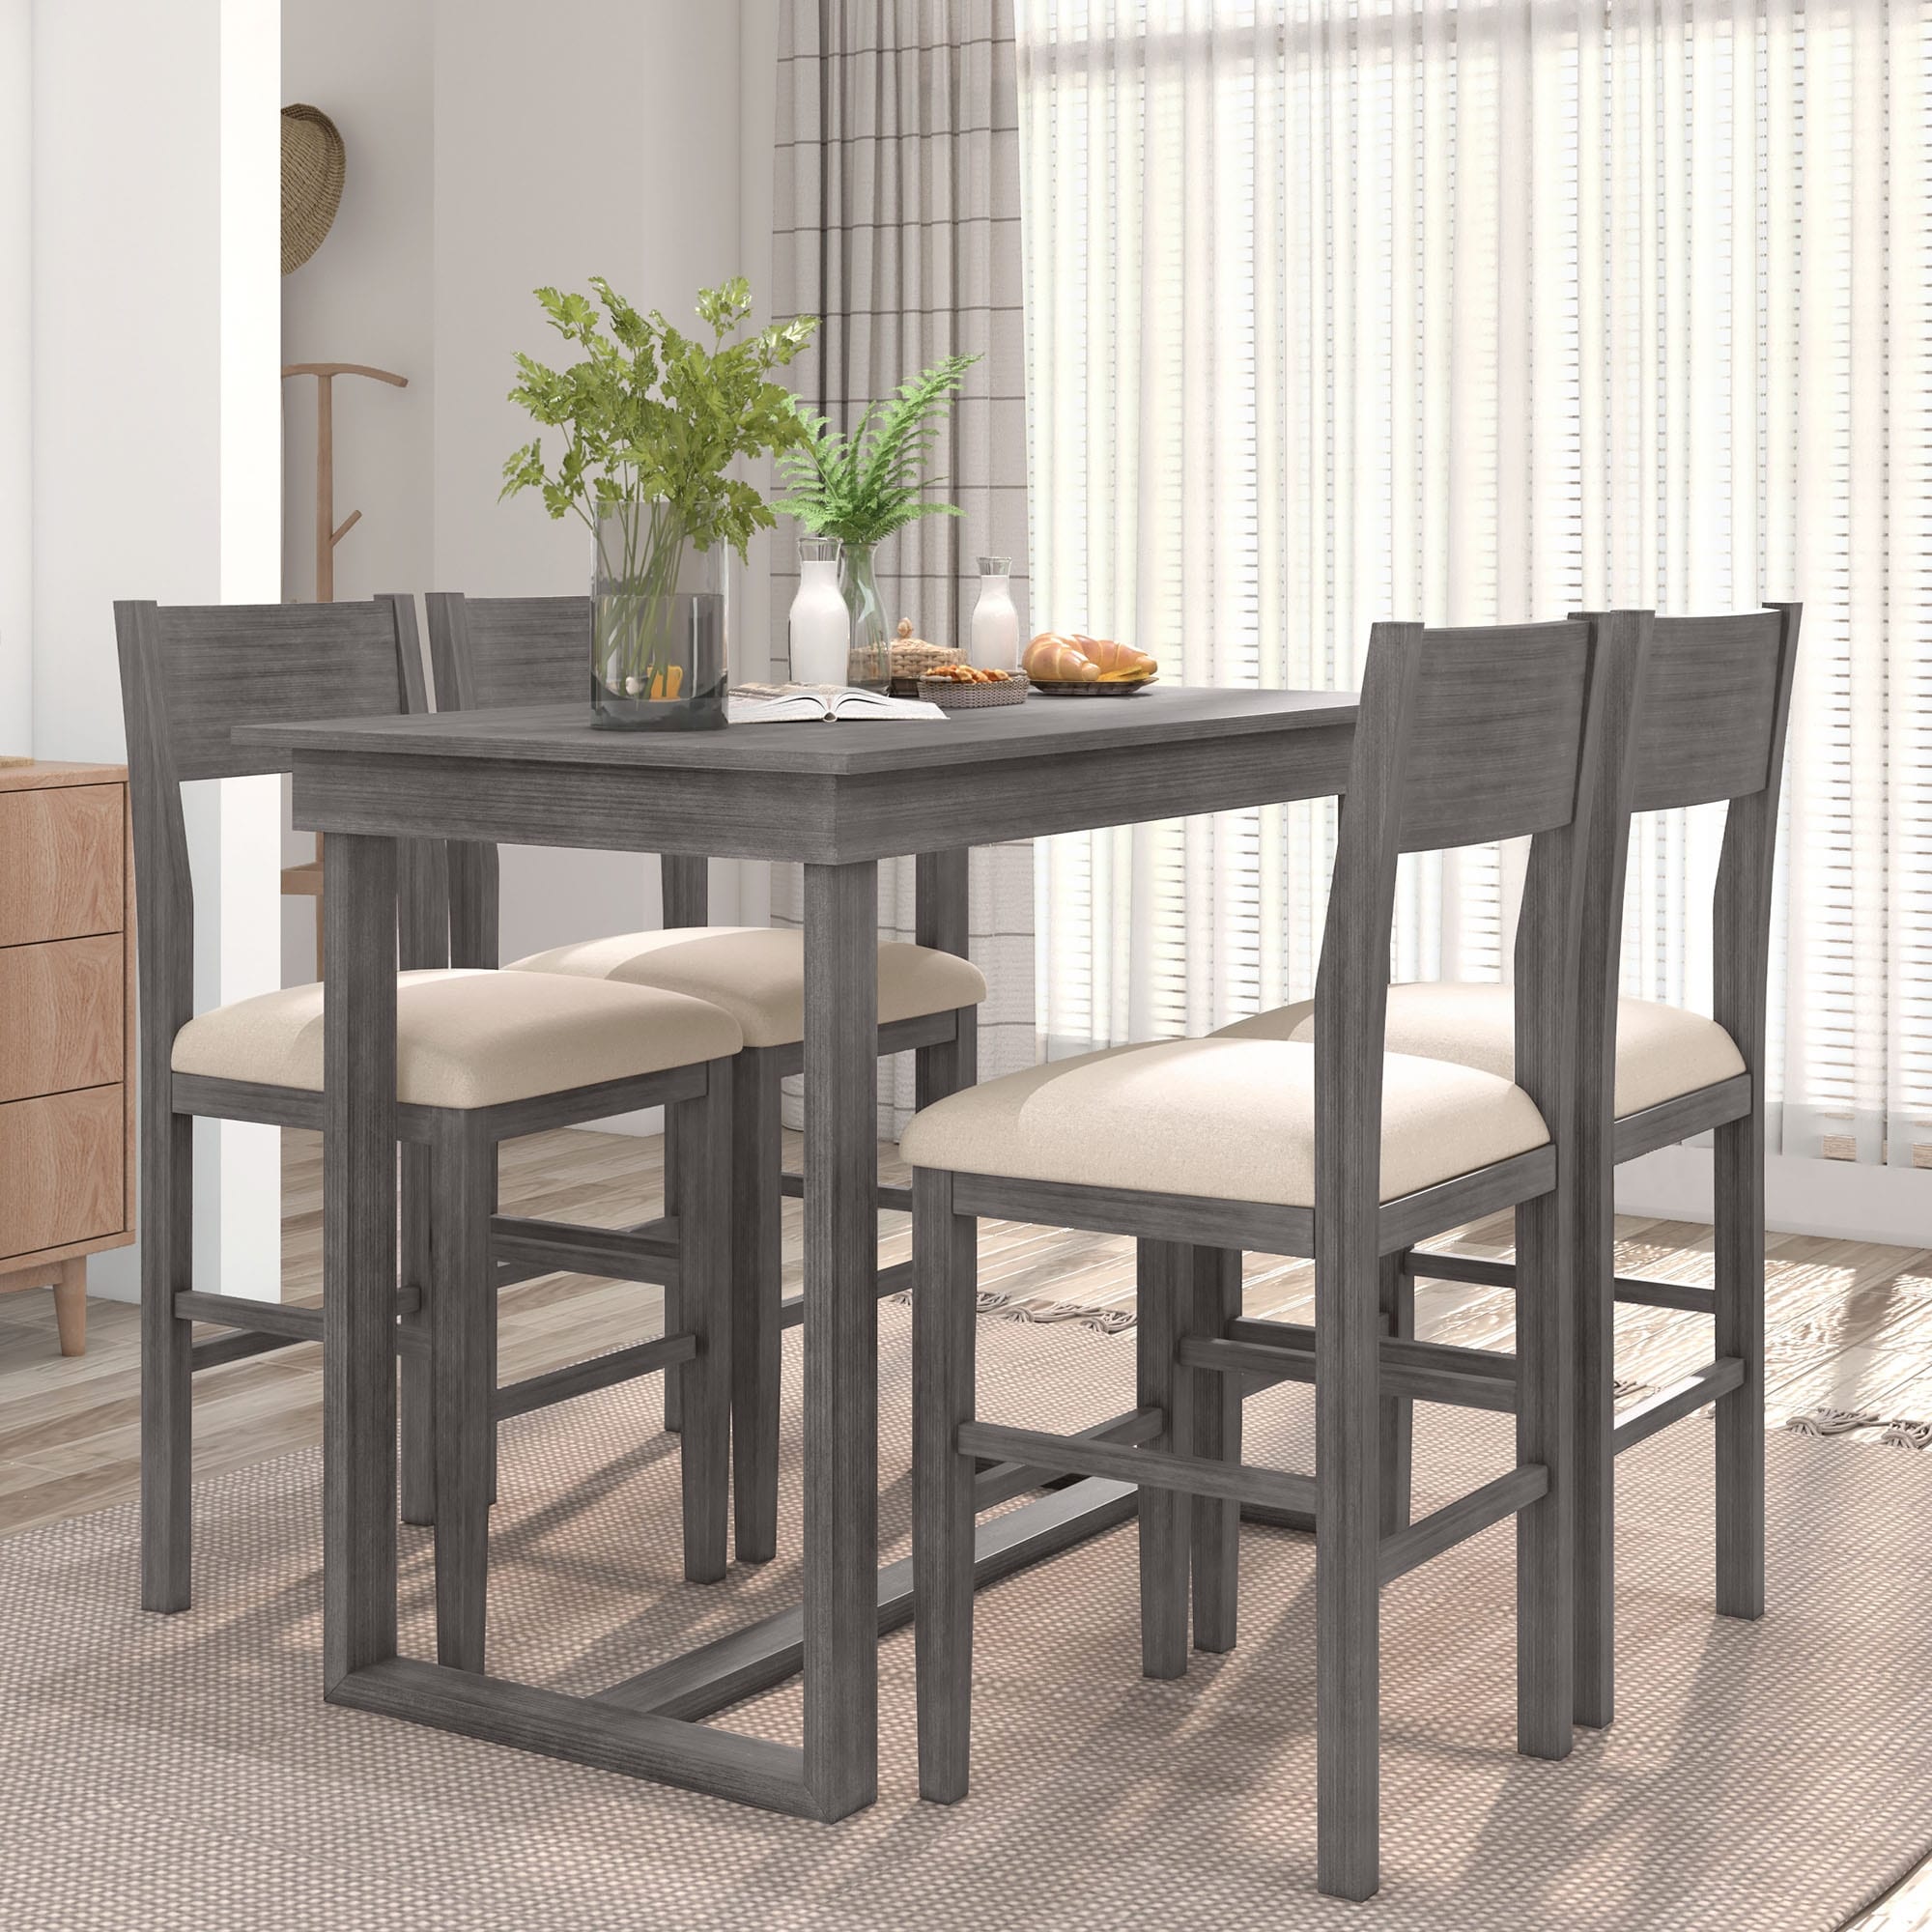 https://ak1.ostkcdn.com/images/products/is/images/direct/9284ad8bff4d5d1ba754cca7ab68859653f1ec99/Counter-Height-5-Piece-Dining-Table-Set-with-1-Rectangular-Dining-Table-and-4-Dining-Chairs-for-Small-Places.jpg